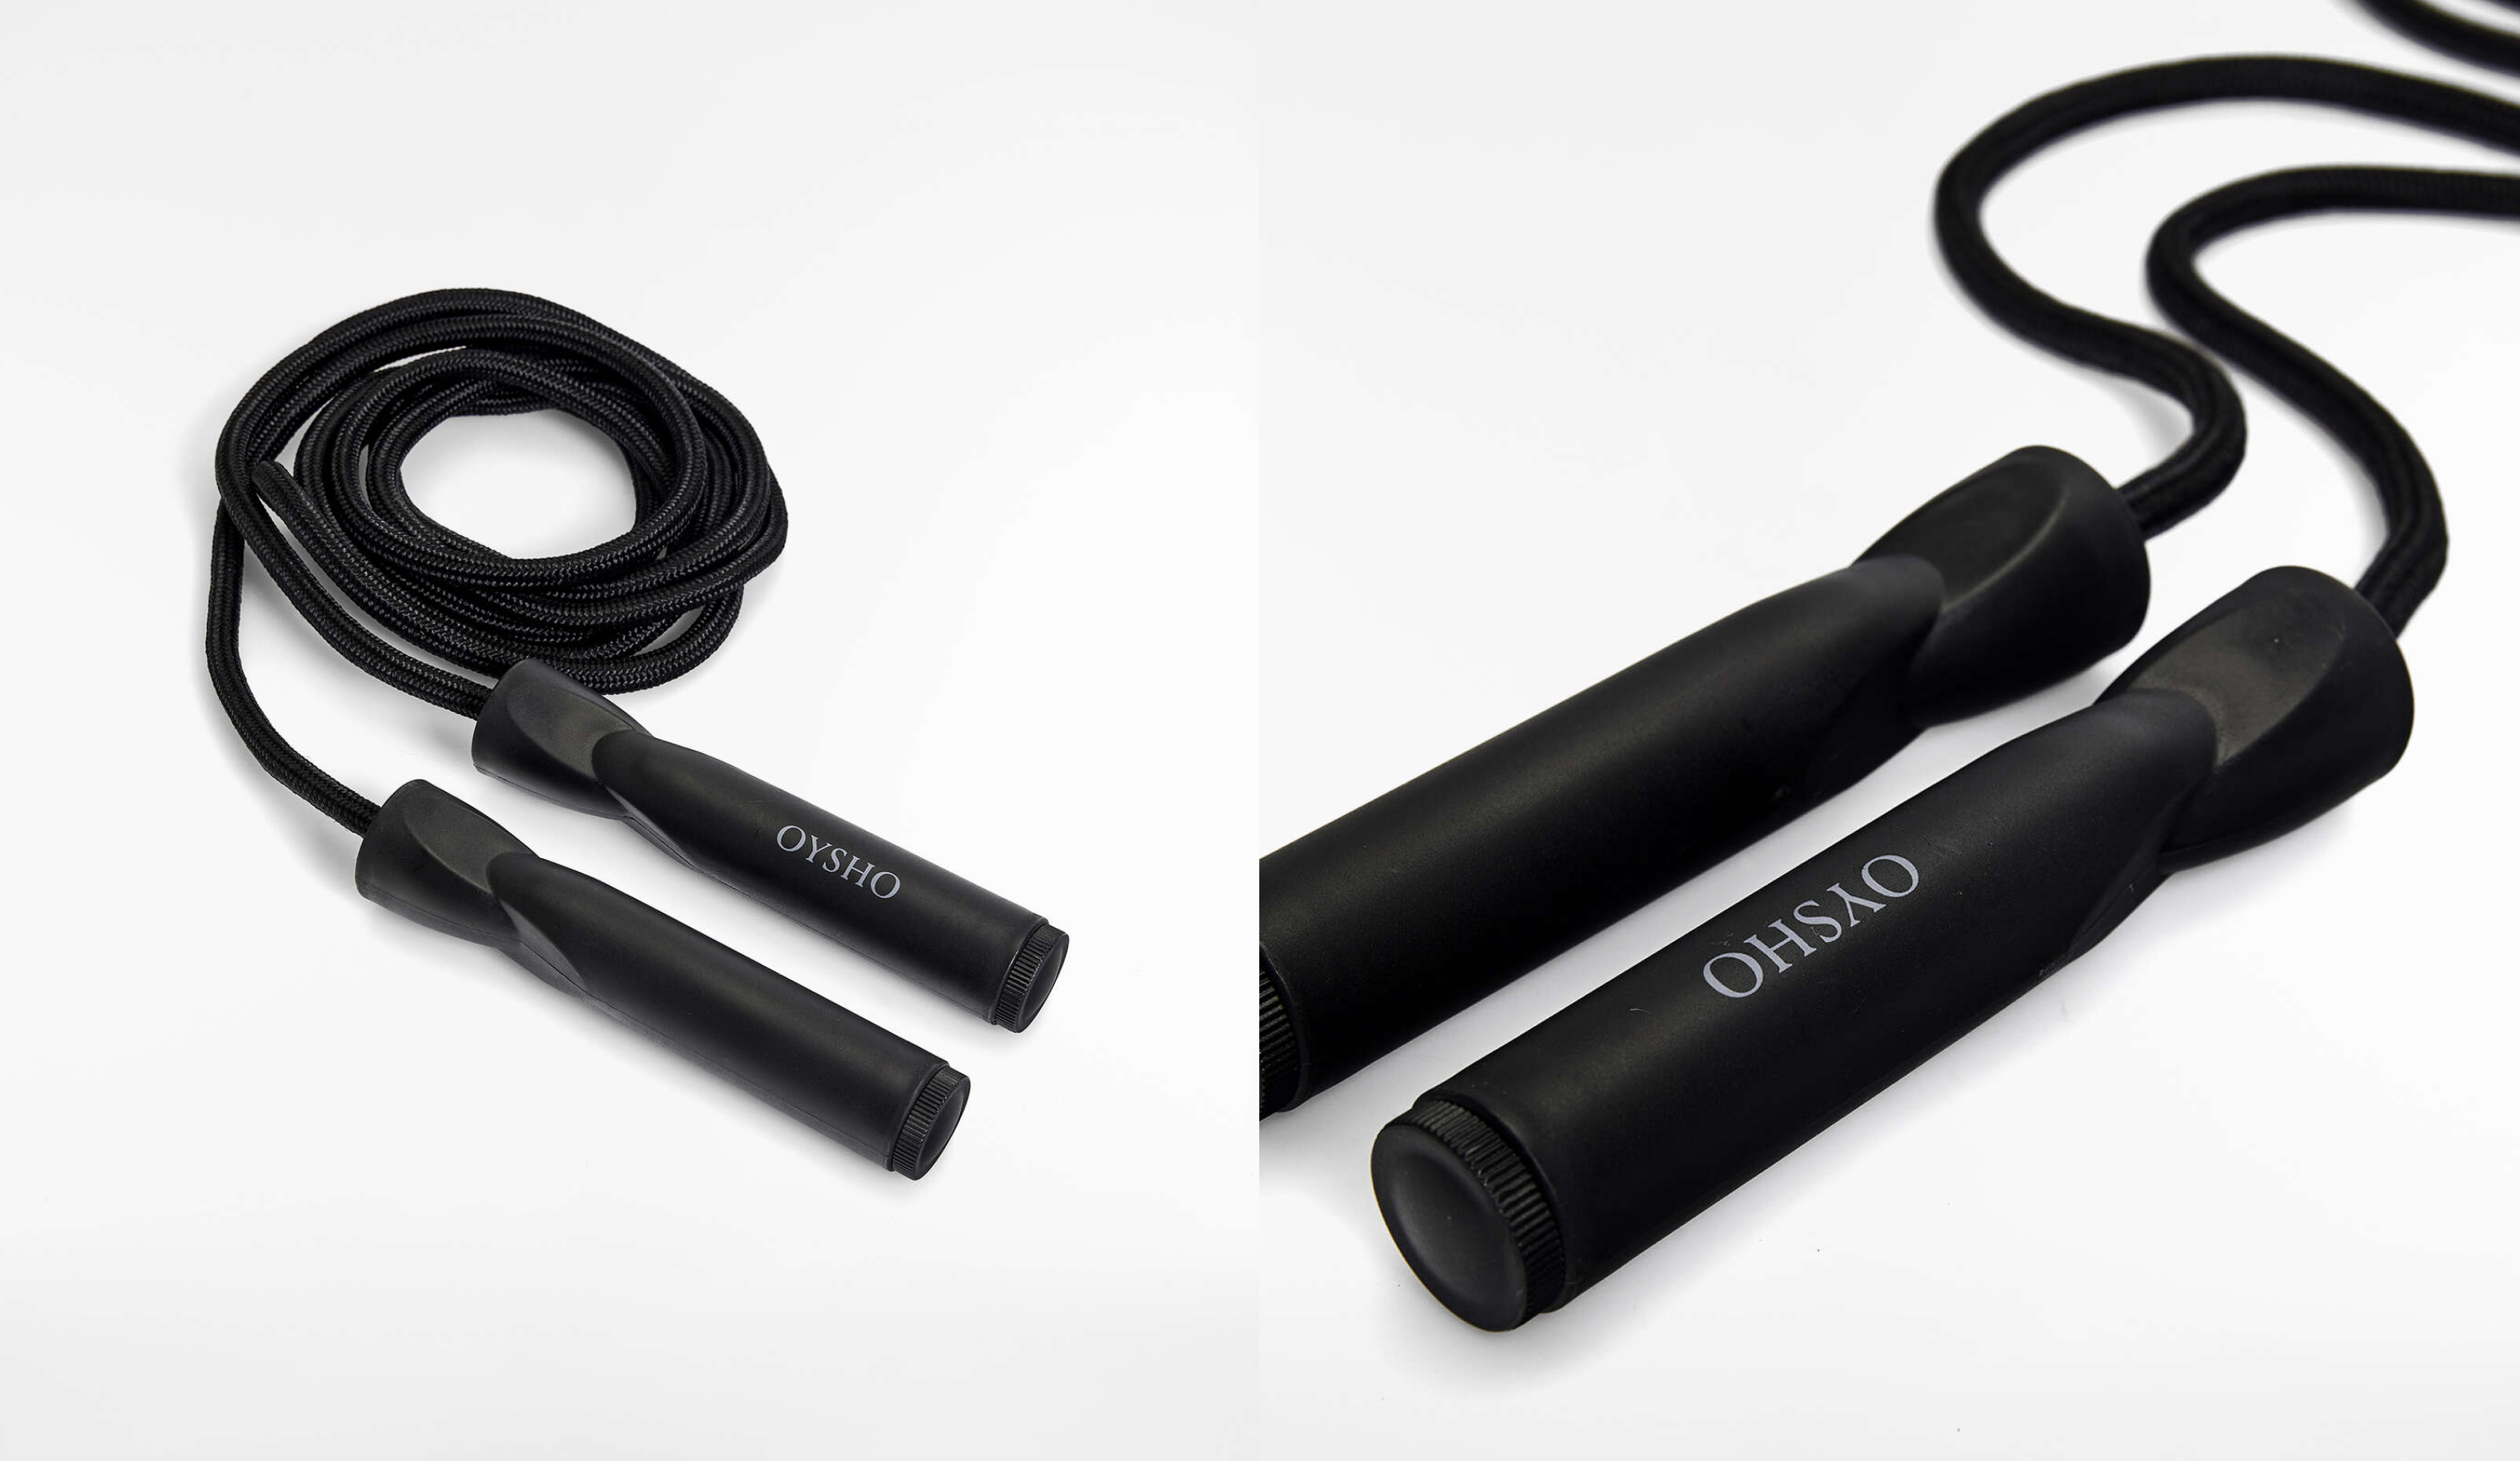 Fitness skipping rope